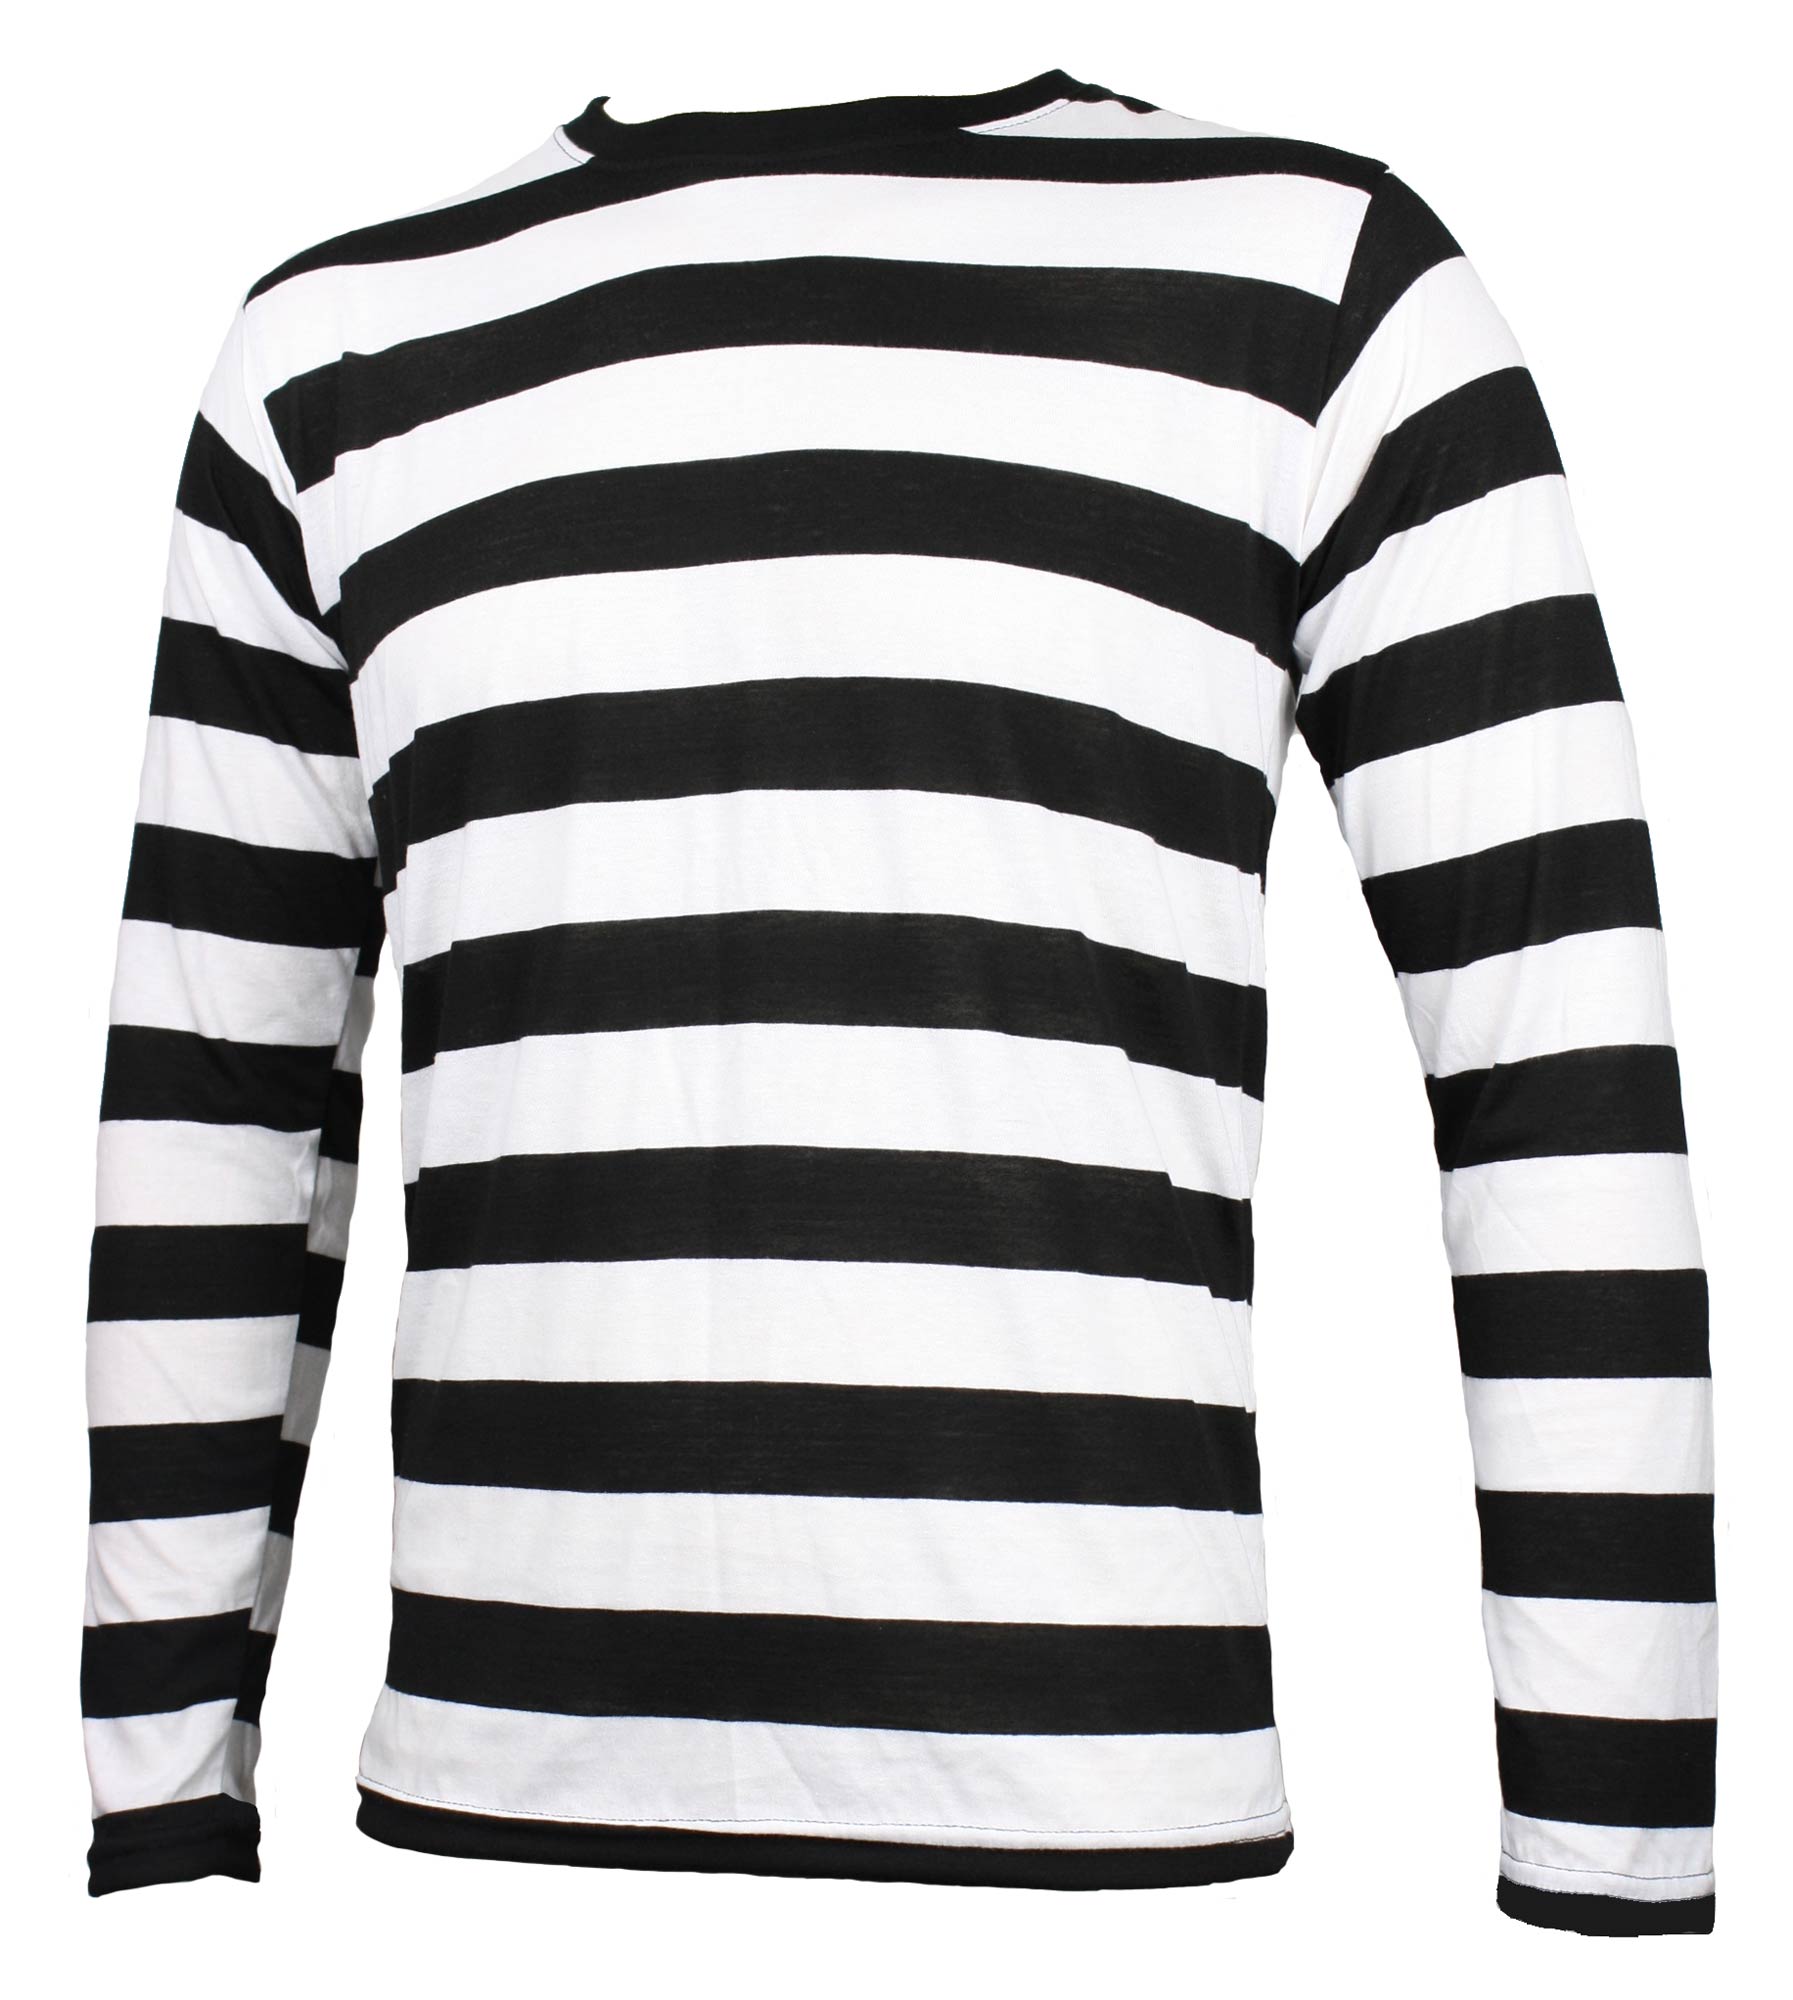 NYC Long Sleeve PUNK GOTH Emo mime Stripe Striped Shirt Black White S M L XL - Picture 1 of 1